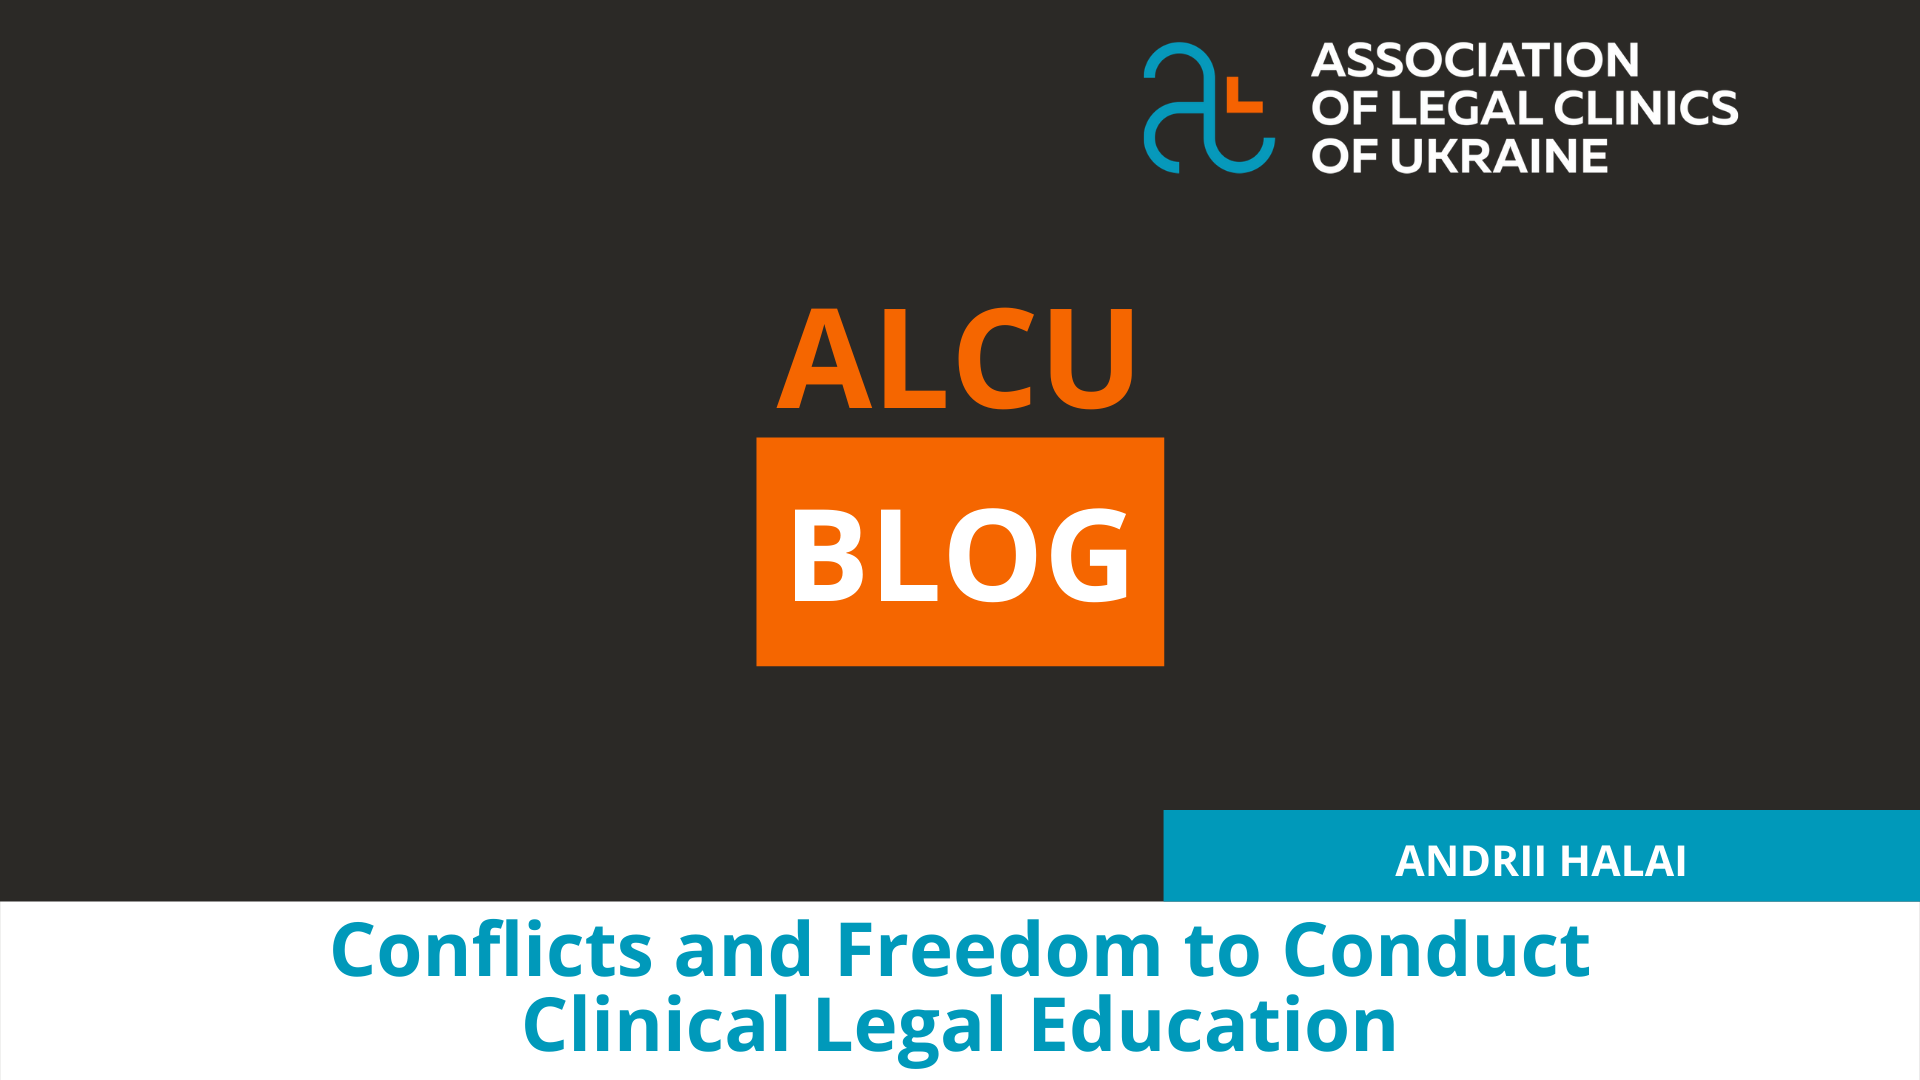 Conflict and Freedom to Conduct Legal Clinical Education